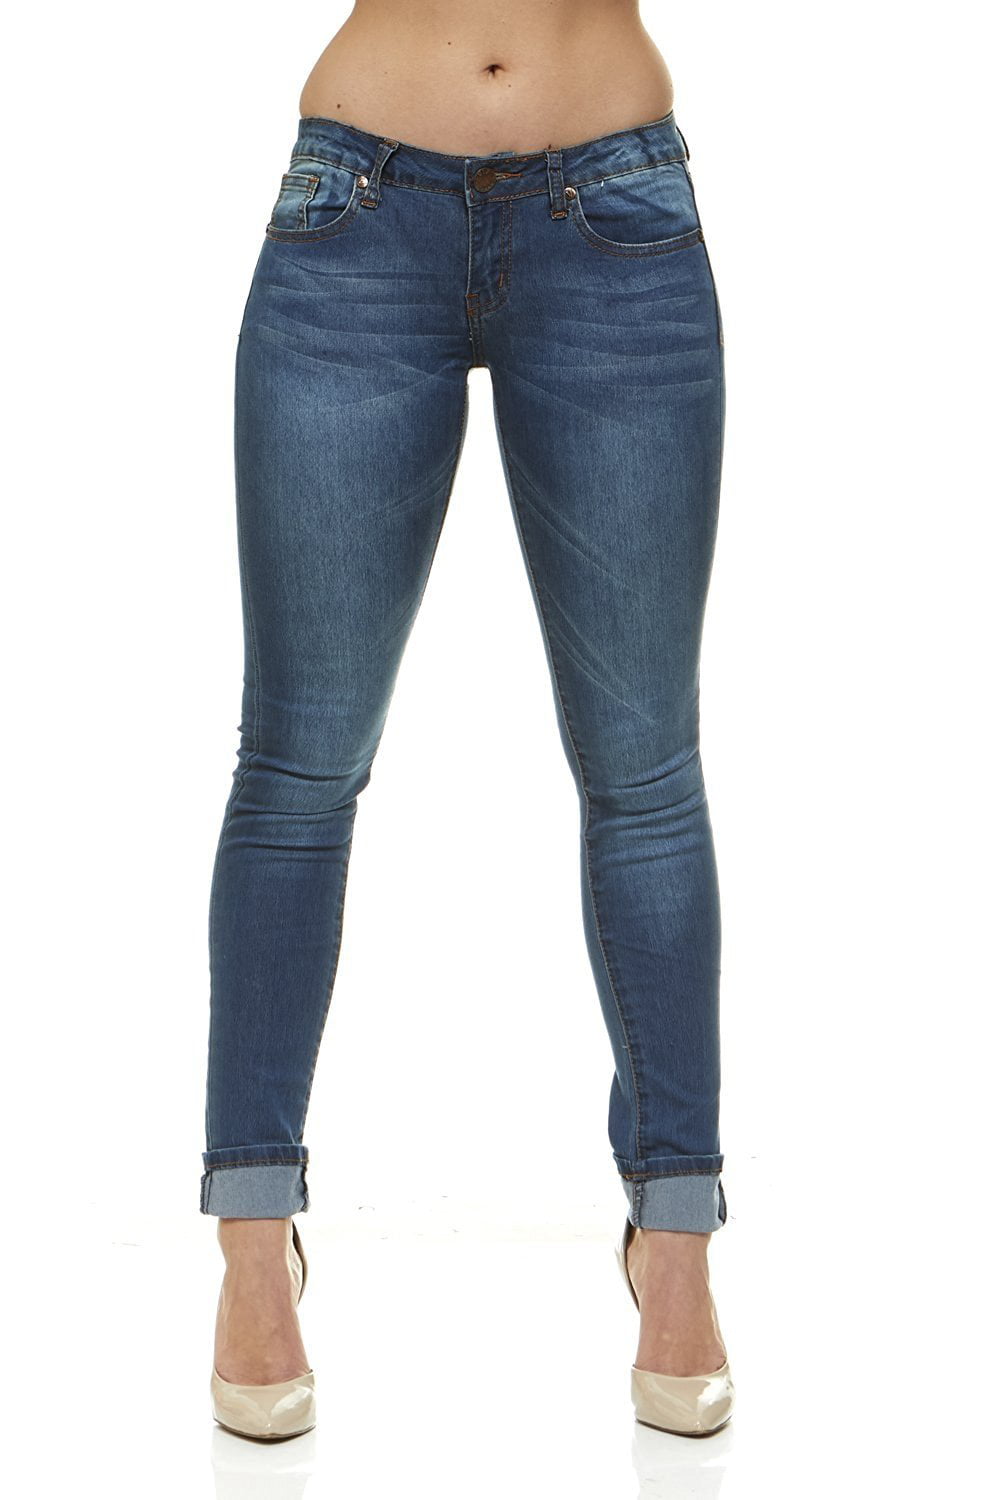 VIP Jeans High or Low Rise Ultra Skinny For Women Slim Fit In 4 Colors 